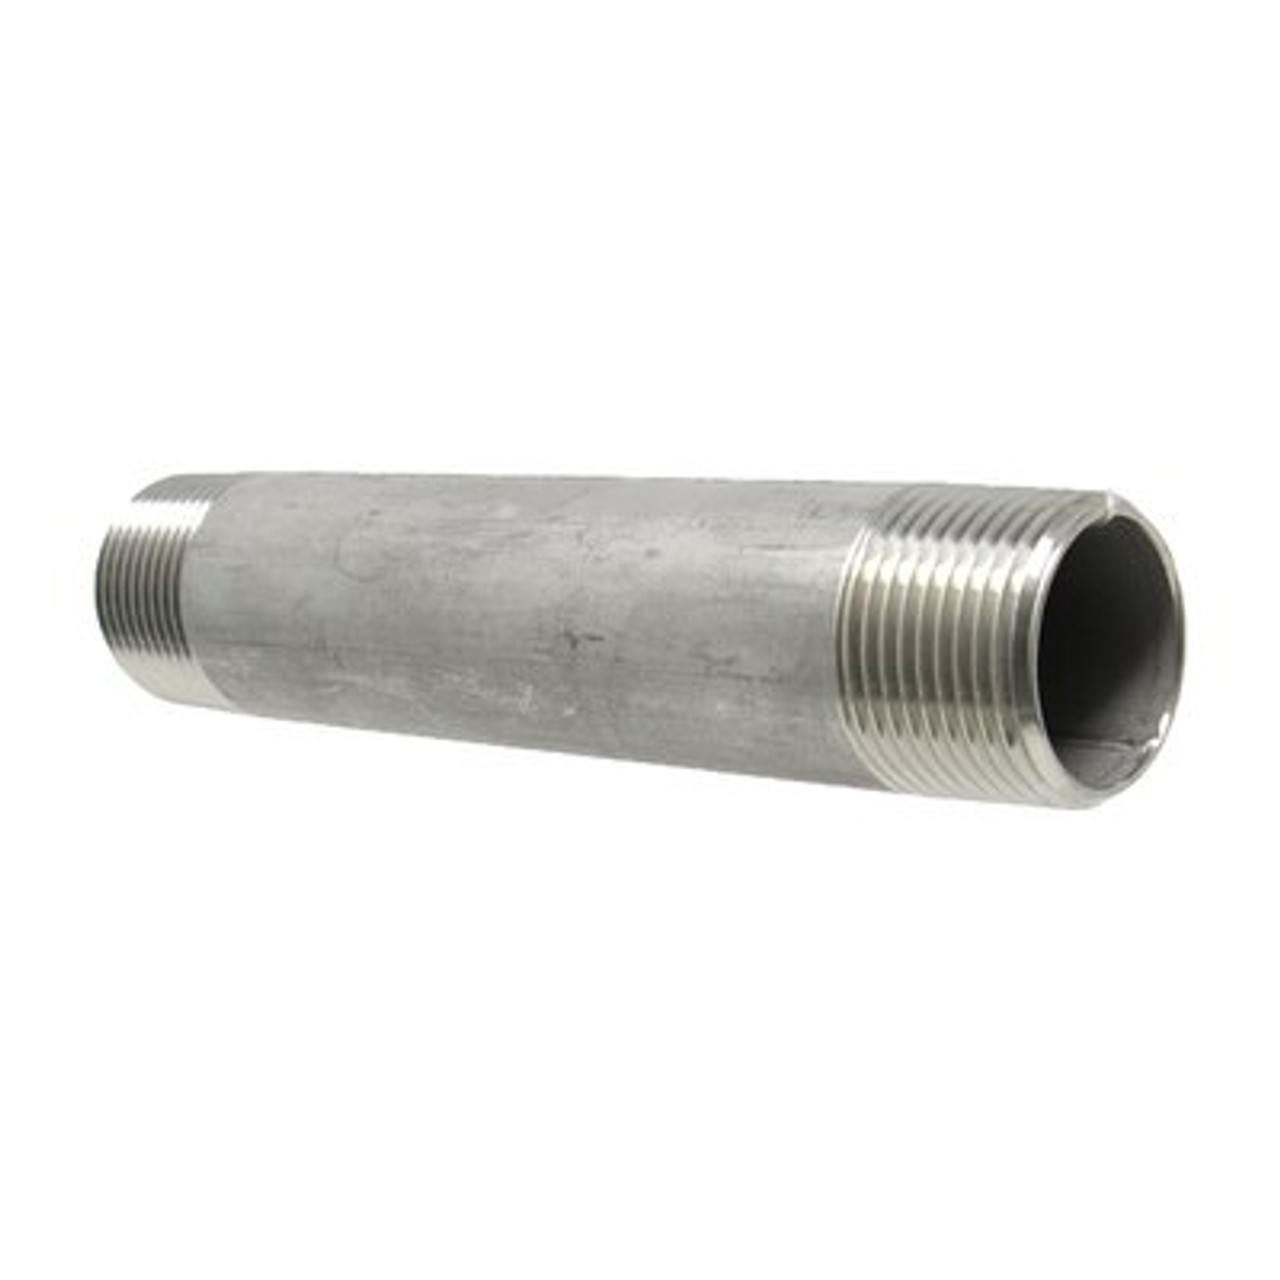 1/2 x 6" Stainless Steel 316 Male NPT Pipe Nipple  SS113-D6